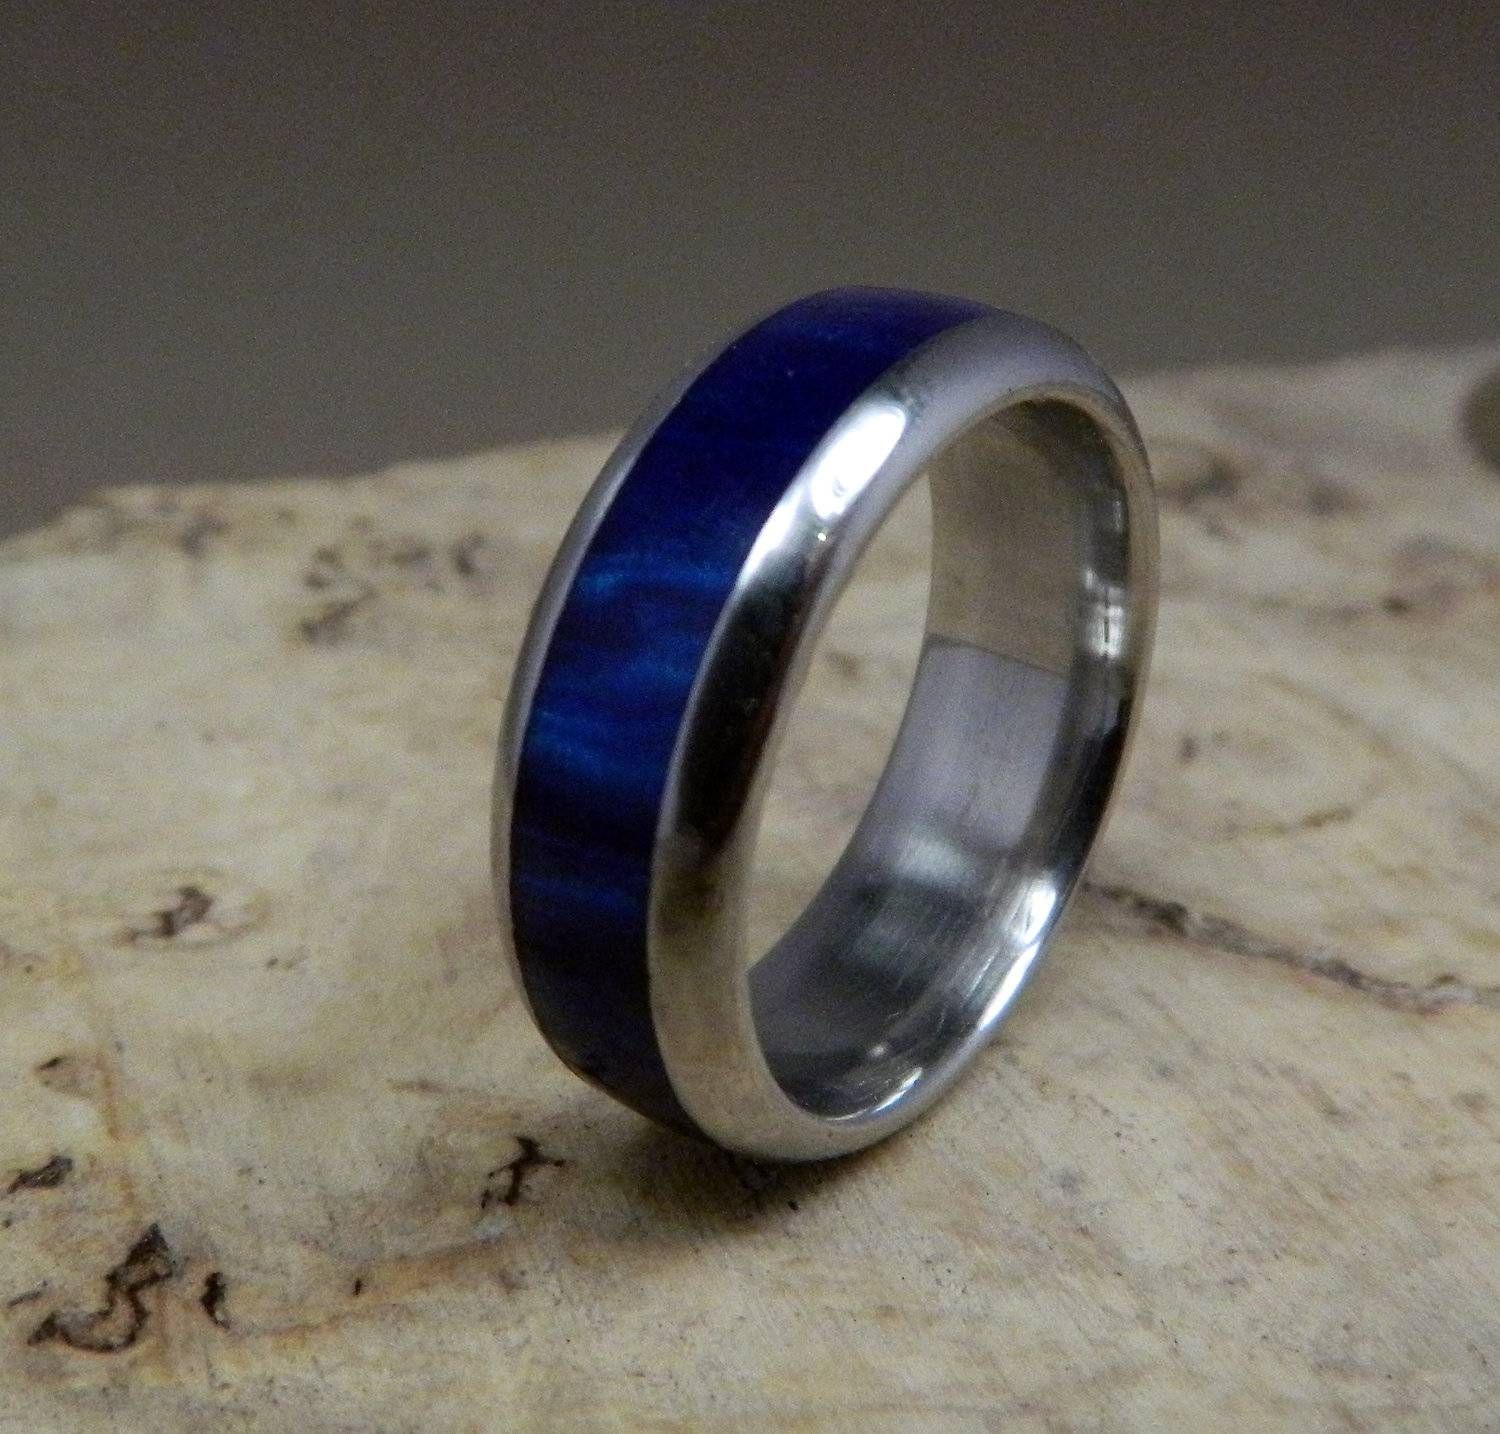 Stainless Steel Ring, Blue Ring, Acrylic Ring, Wedding Ring, Mens In Handmade Men's Wedding Bands (View 7 of 15)